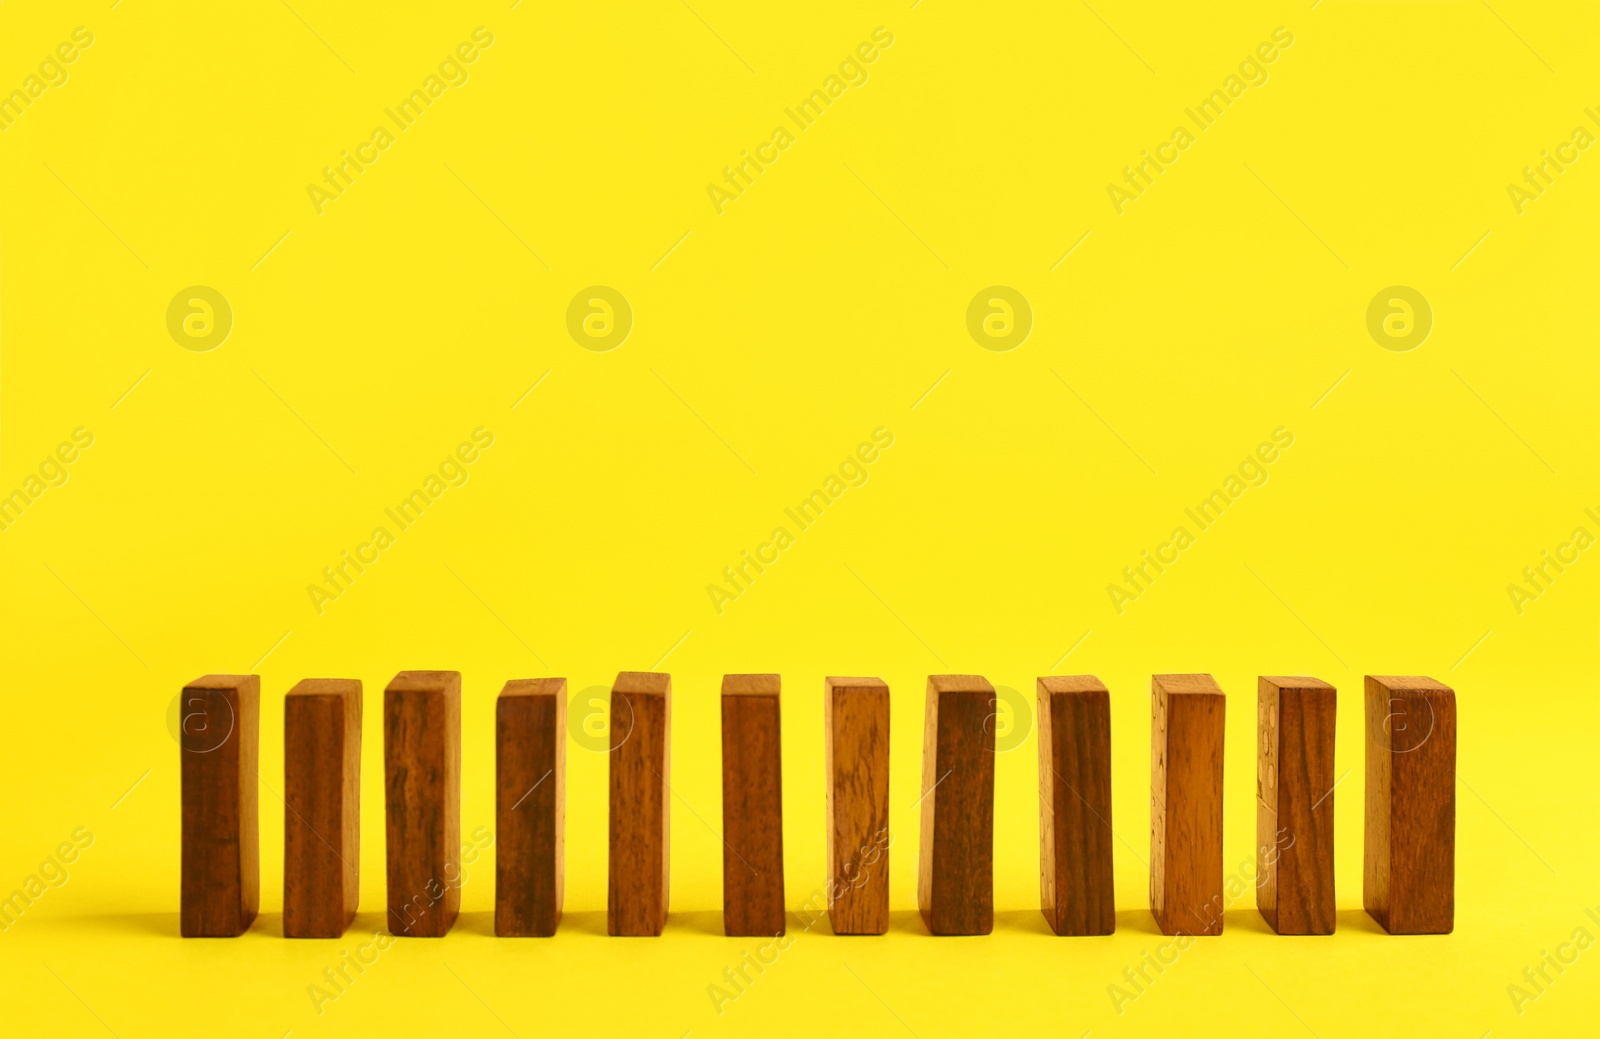 Photo of Row of wooden domino tiles on yellow background. Space for text